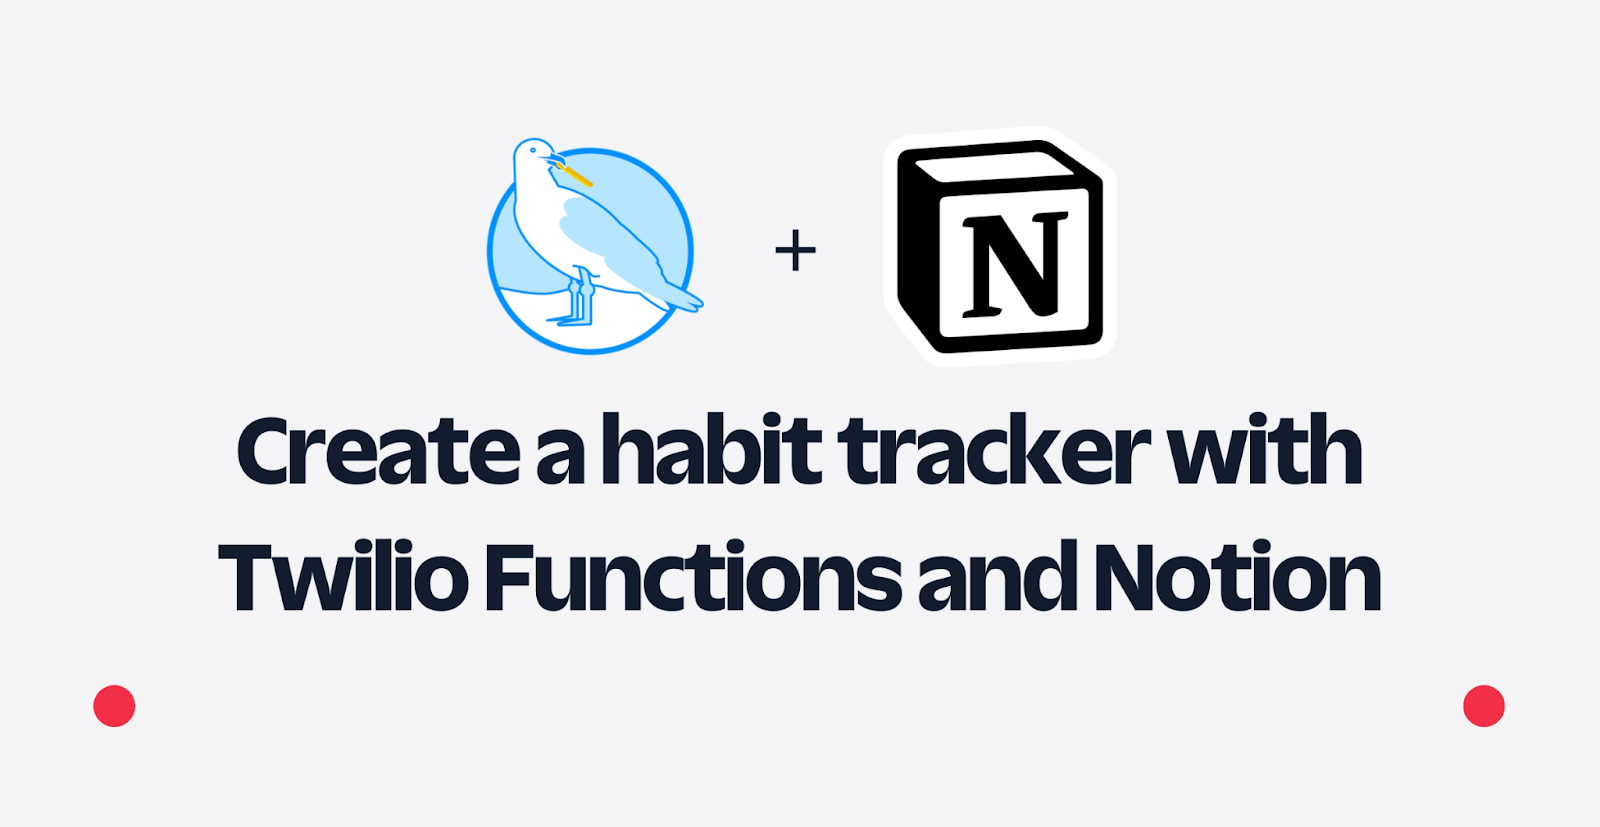 Create a habit tracker with Twilio Functions and Notion